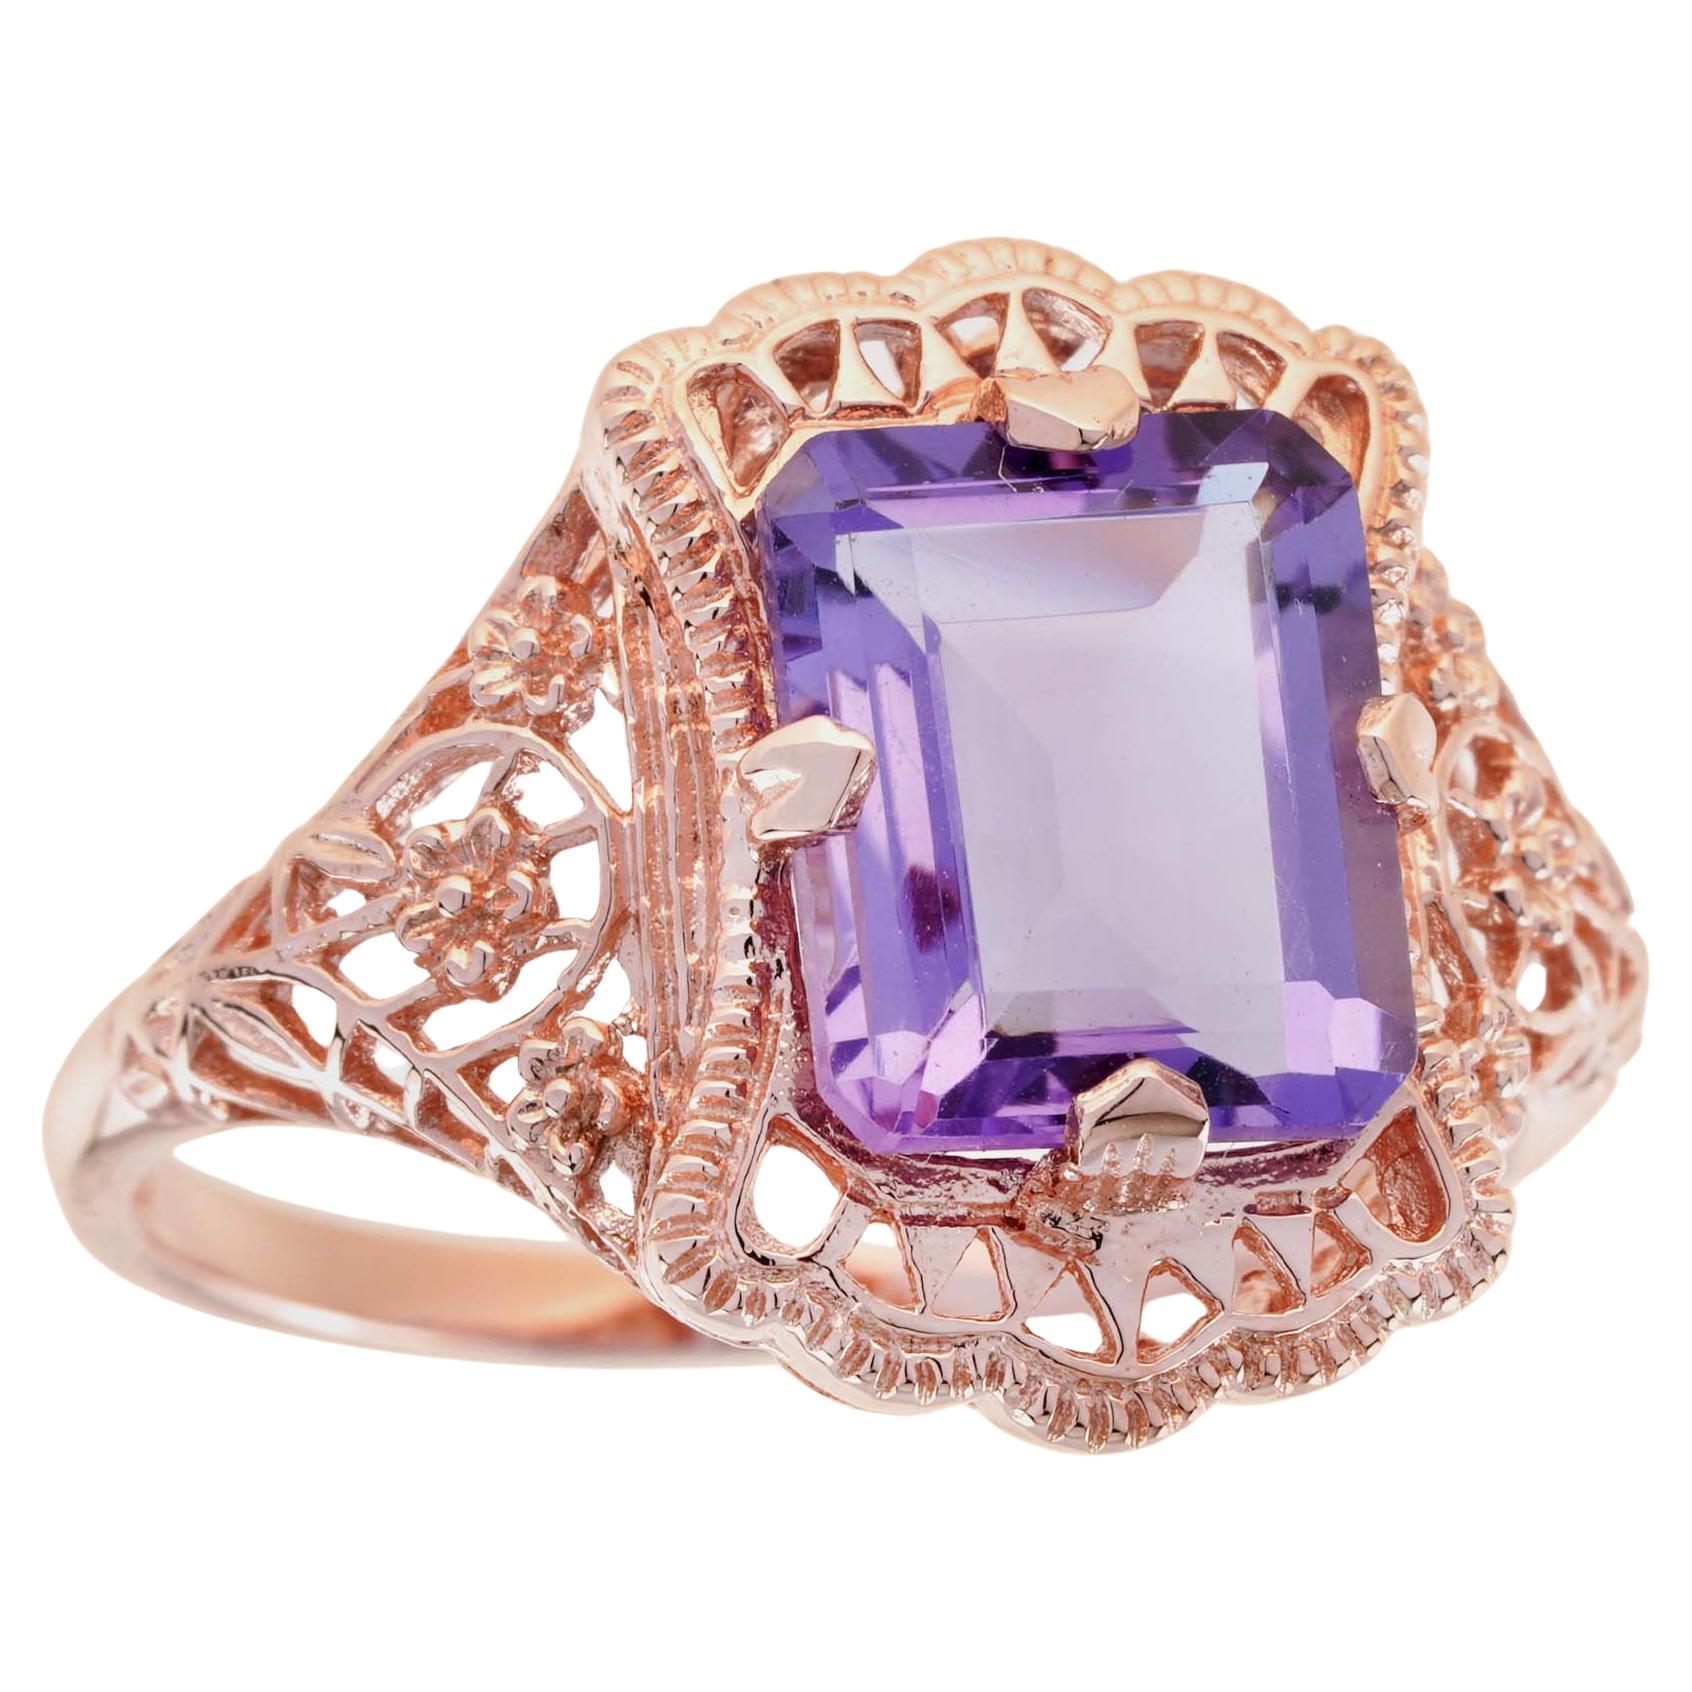 For Sale:  3.5 Ct. Amethyst Vintage Style Filigree Cocktail Ring in Solid 9K Rose Gold